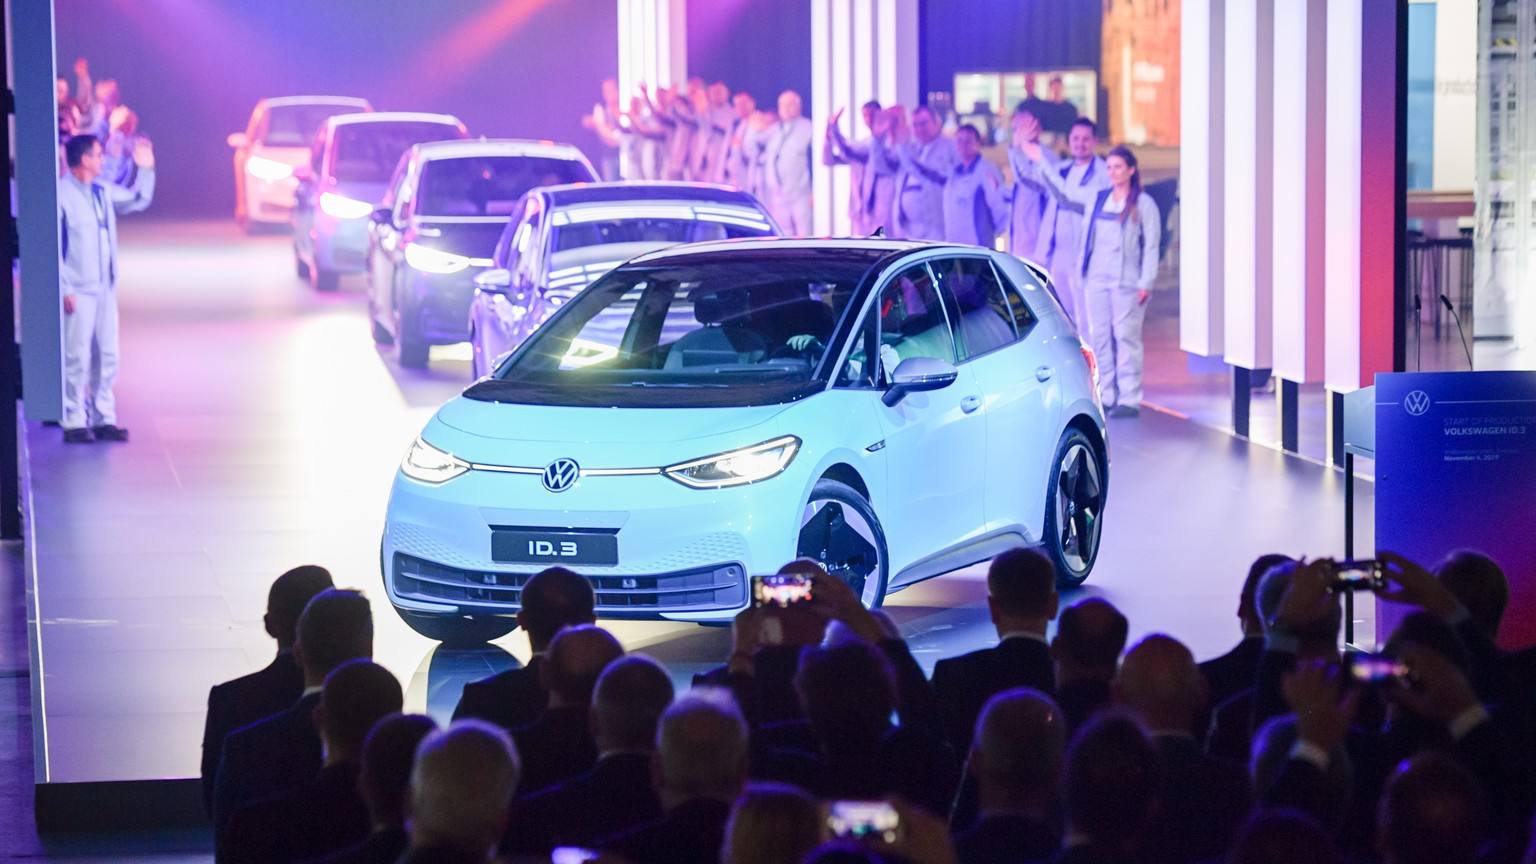 epa07971807 ID.3 cars during a presentation on the occasion of the start of the production of the new electric car Volkswagen ID.3 at the Volkswagen (VW) vehicle factory in Zwickau, Germany 04 Novembe ...